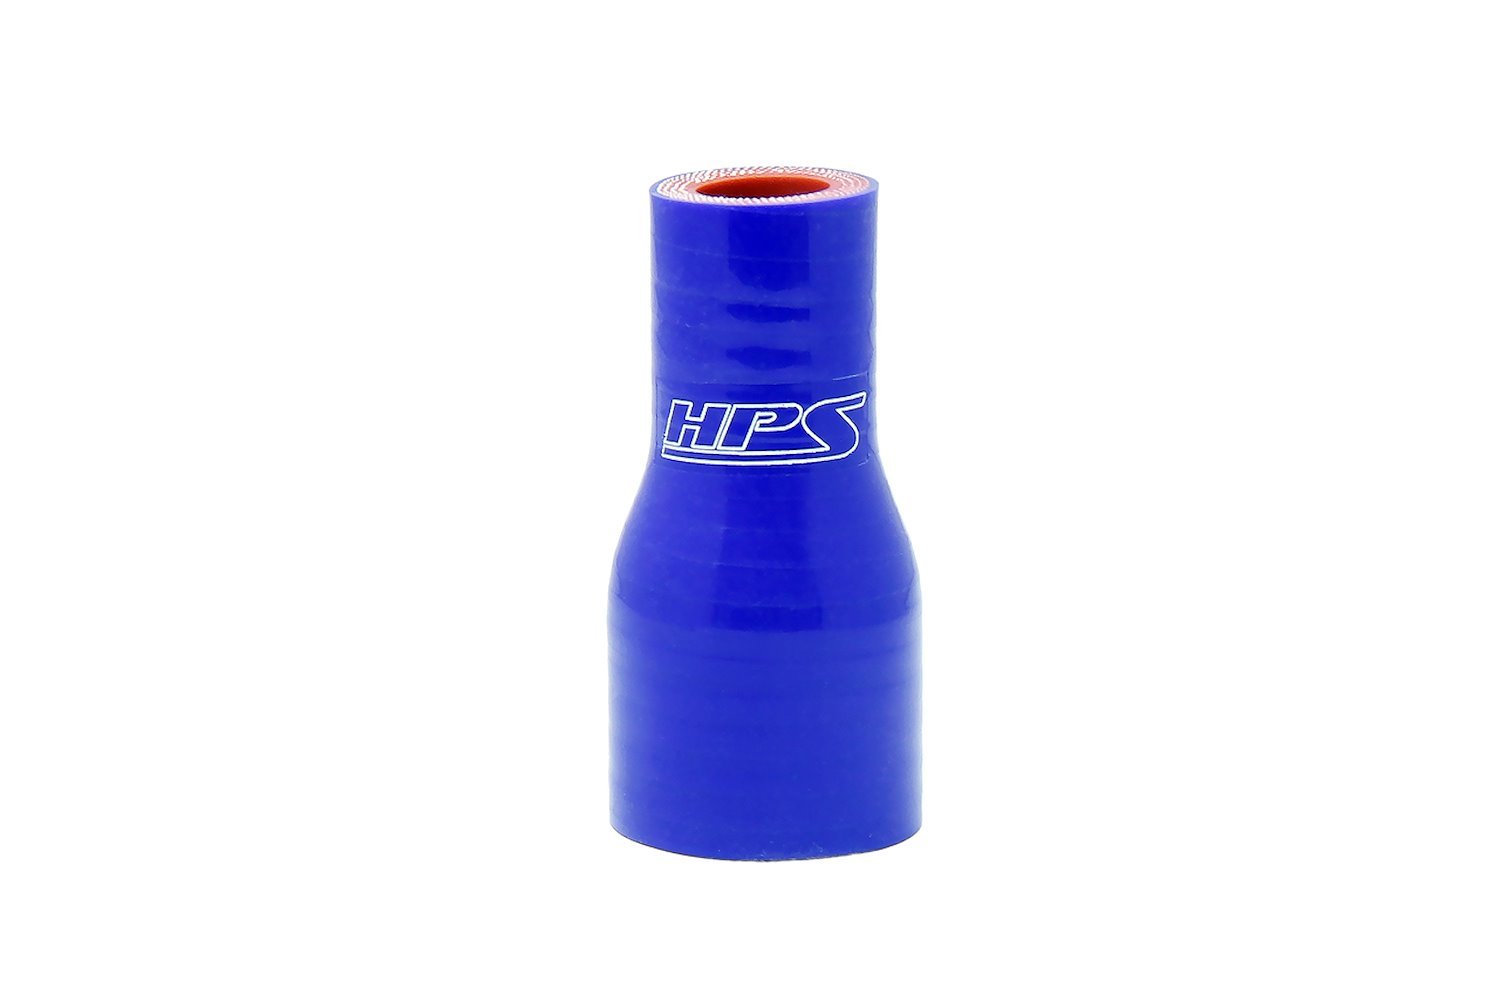 HTSR-062-075-BLUE Silicone Reducer Hose, High-Temp 4-Ply Reinforced, 5/8 in. - 3/4 in. ID, 3 in. Long, Blue